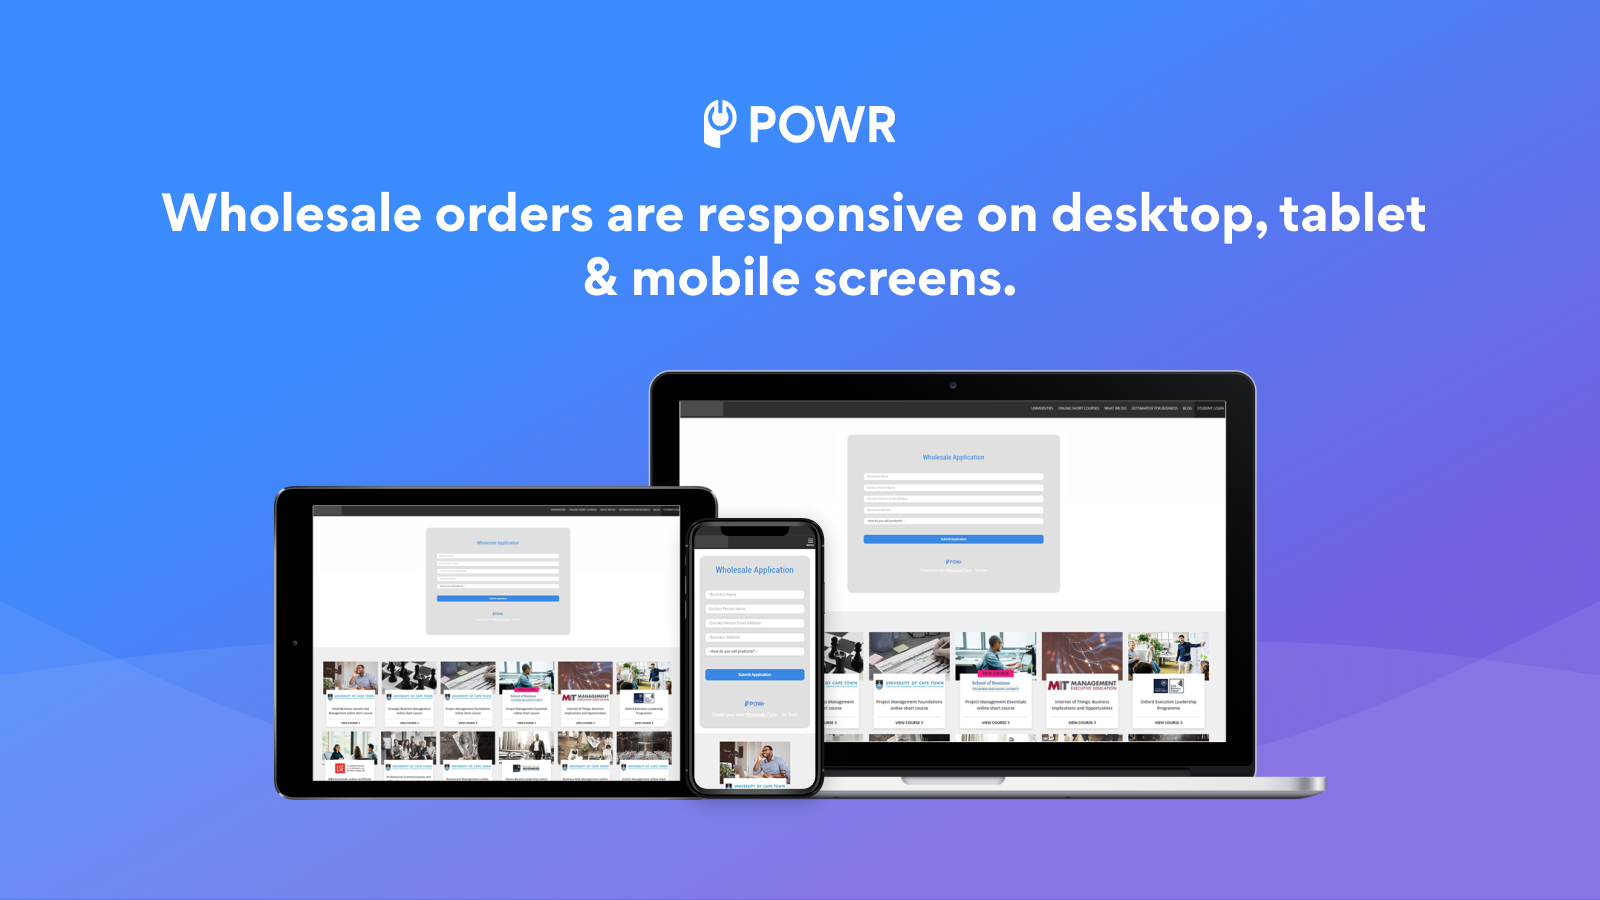 Wholesale orders are responsive on all types of devices.